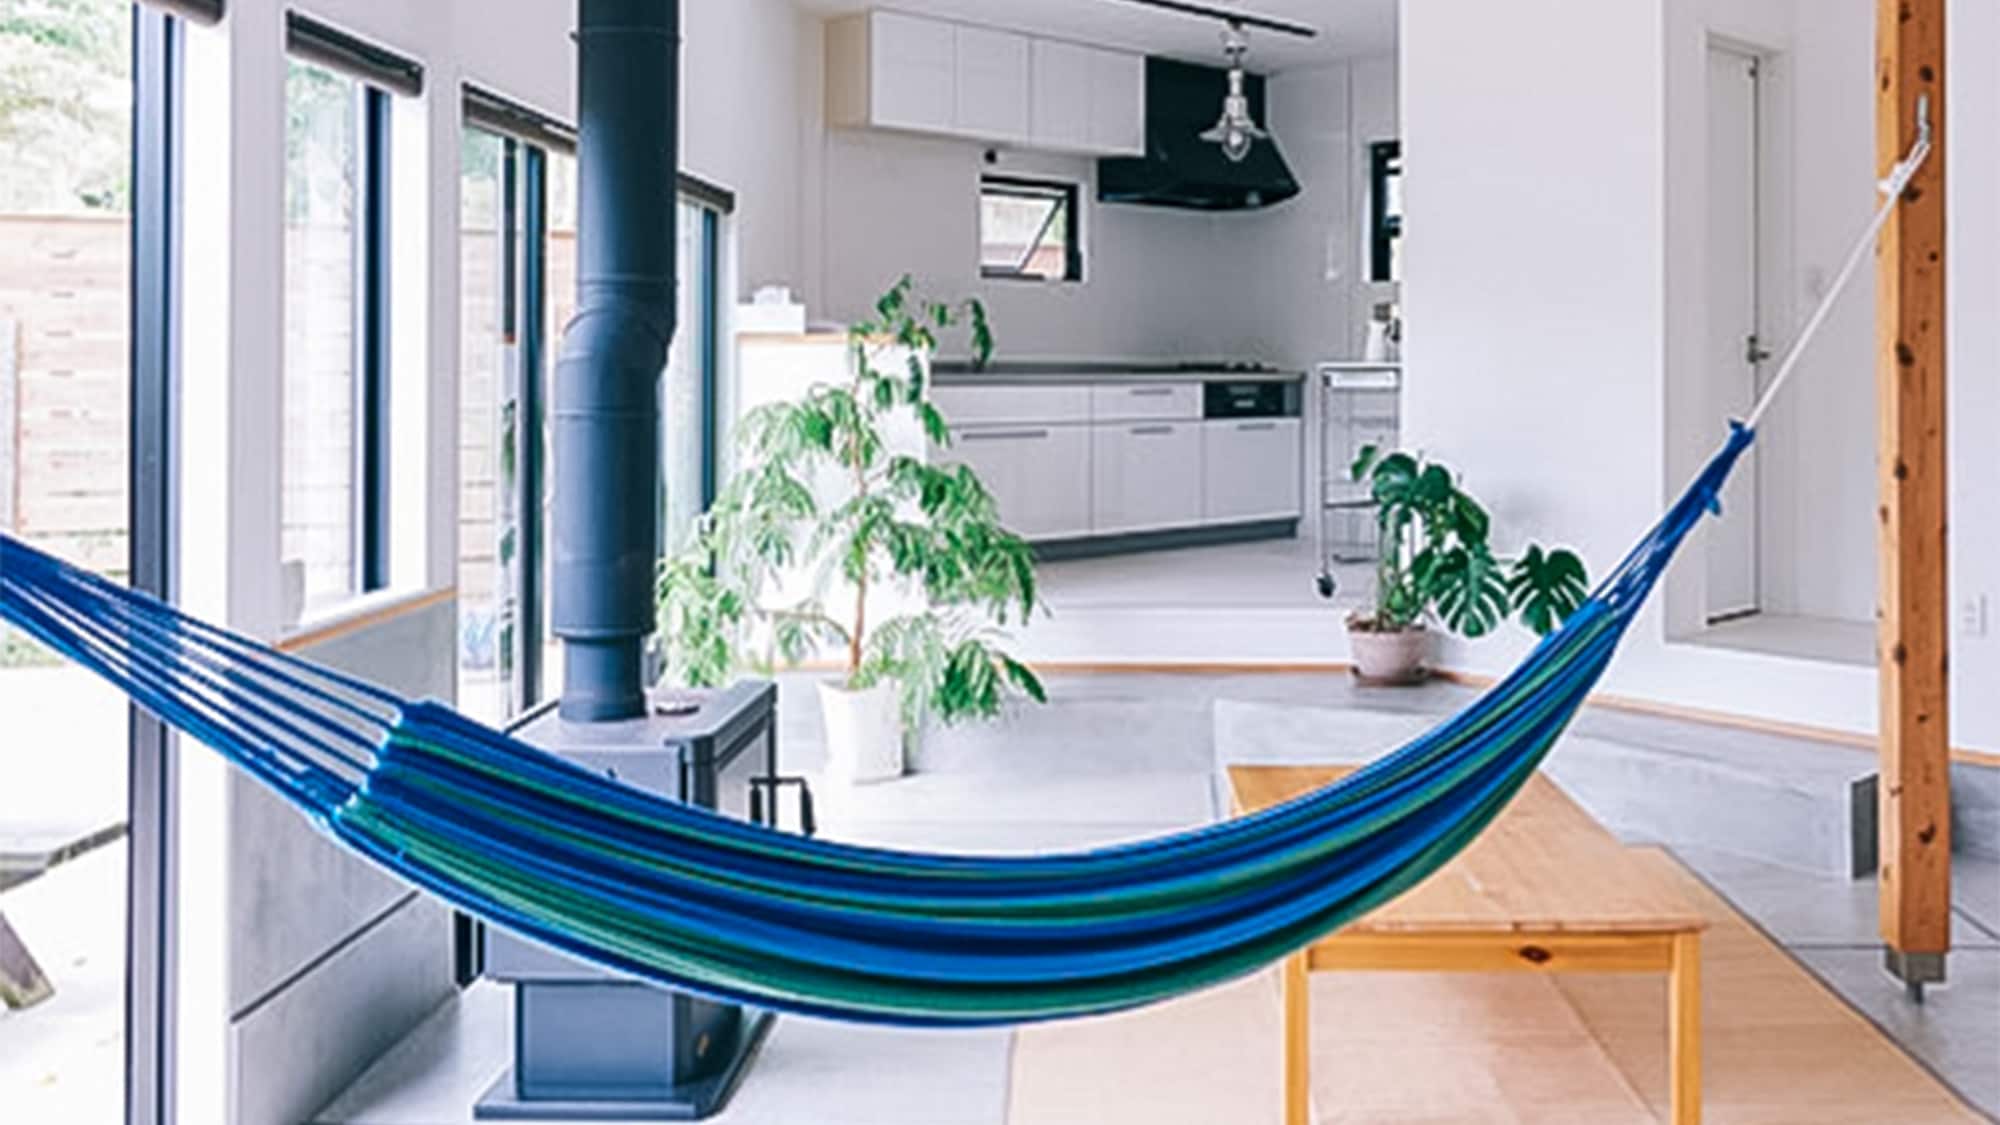 ・ [Living room] How about reading in a hammock?